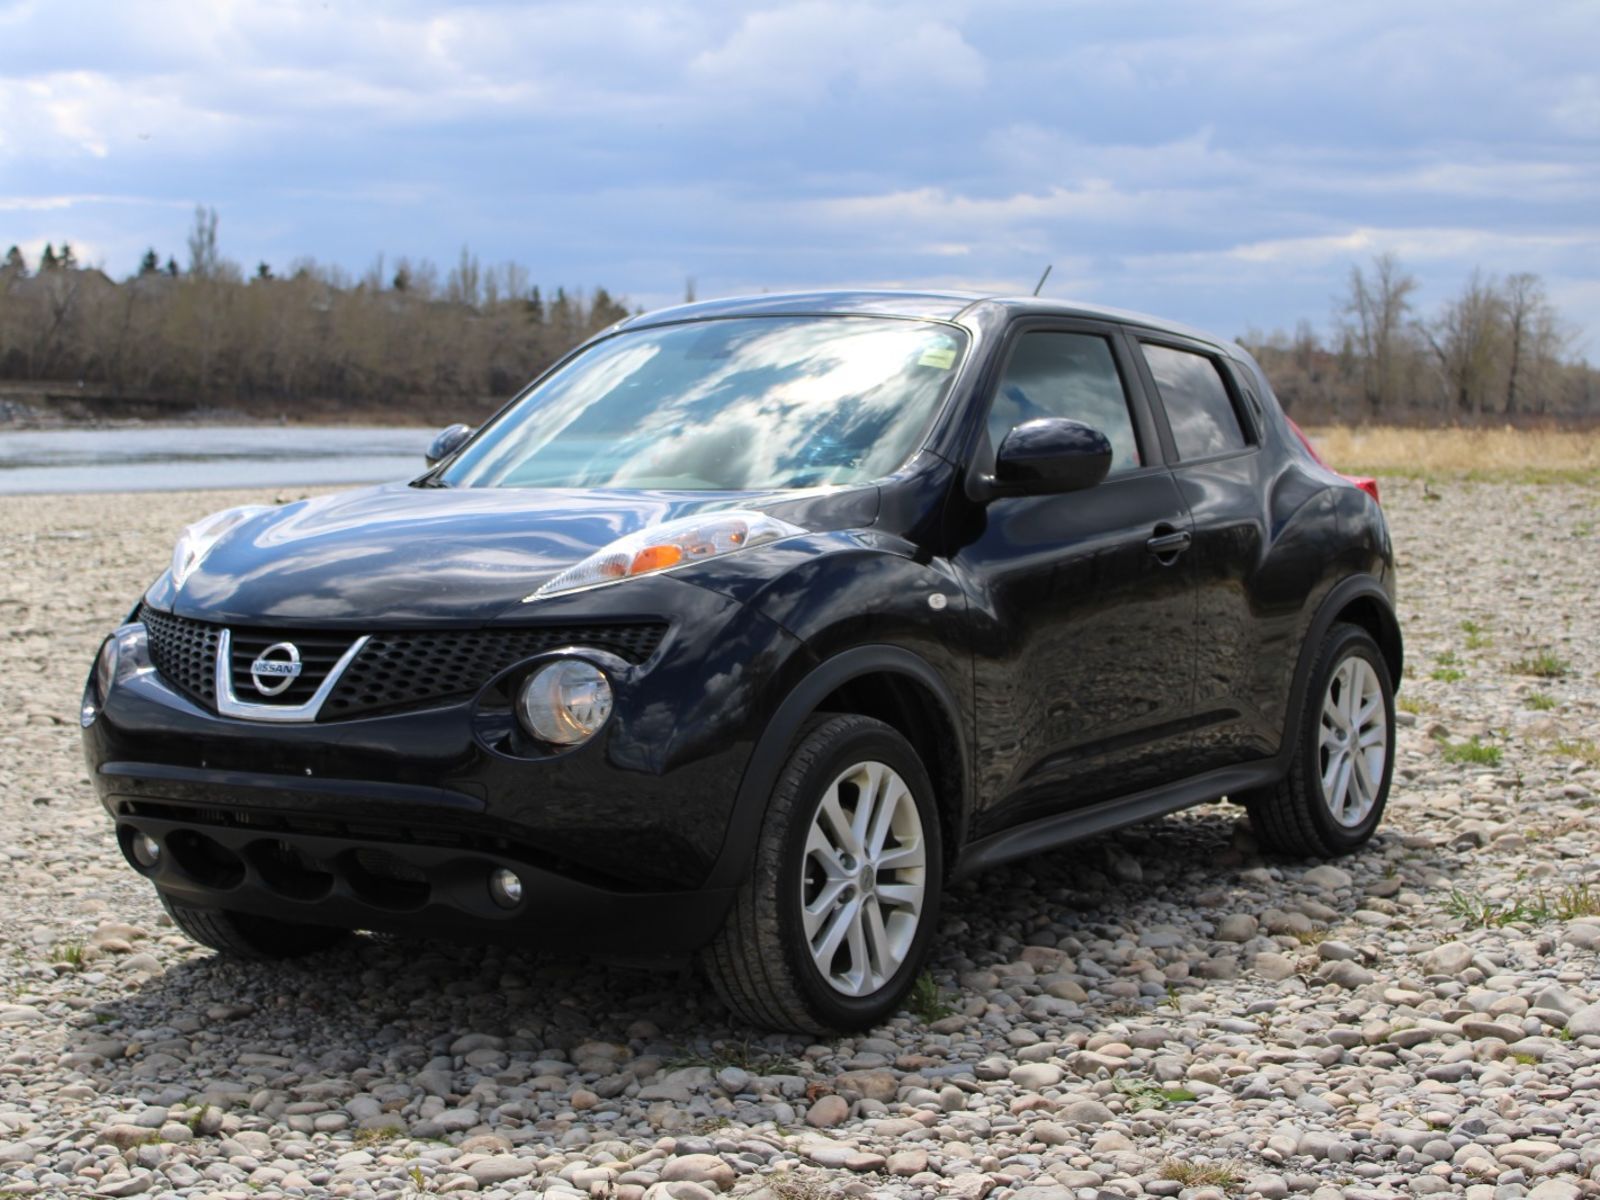 2013 Nissan Juke 5dr AWD - CLEAN CARFAX - ONE OWNER - 